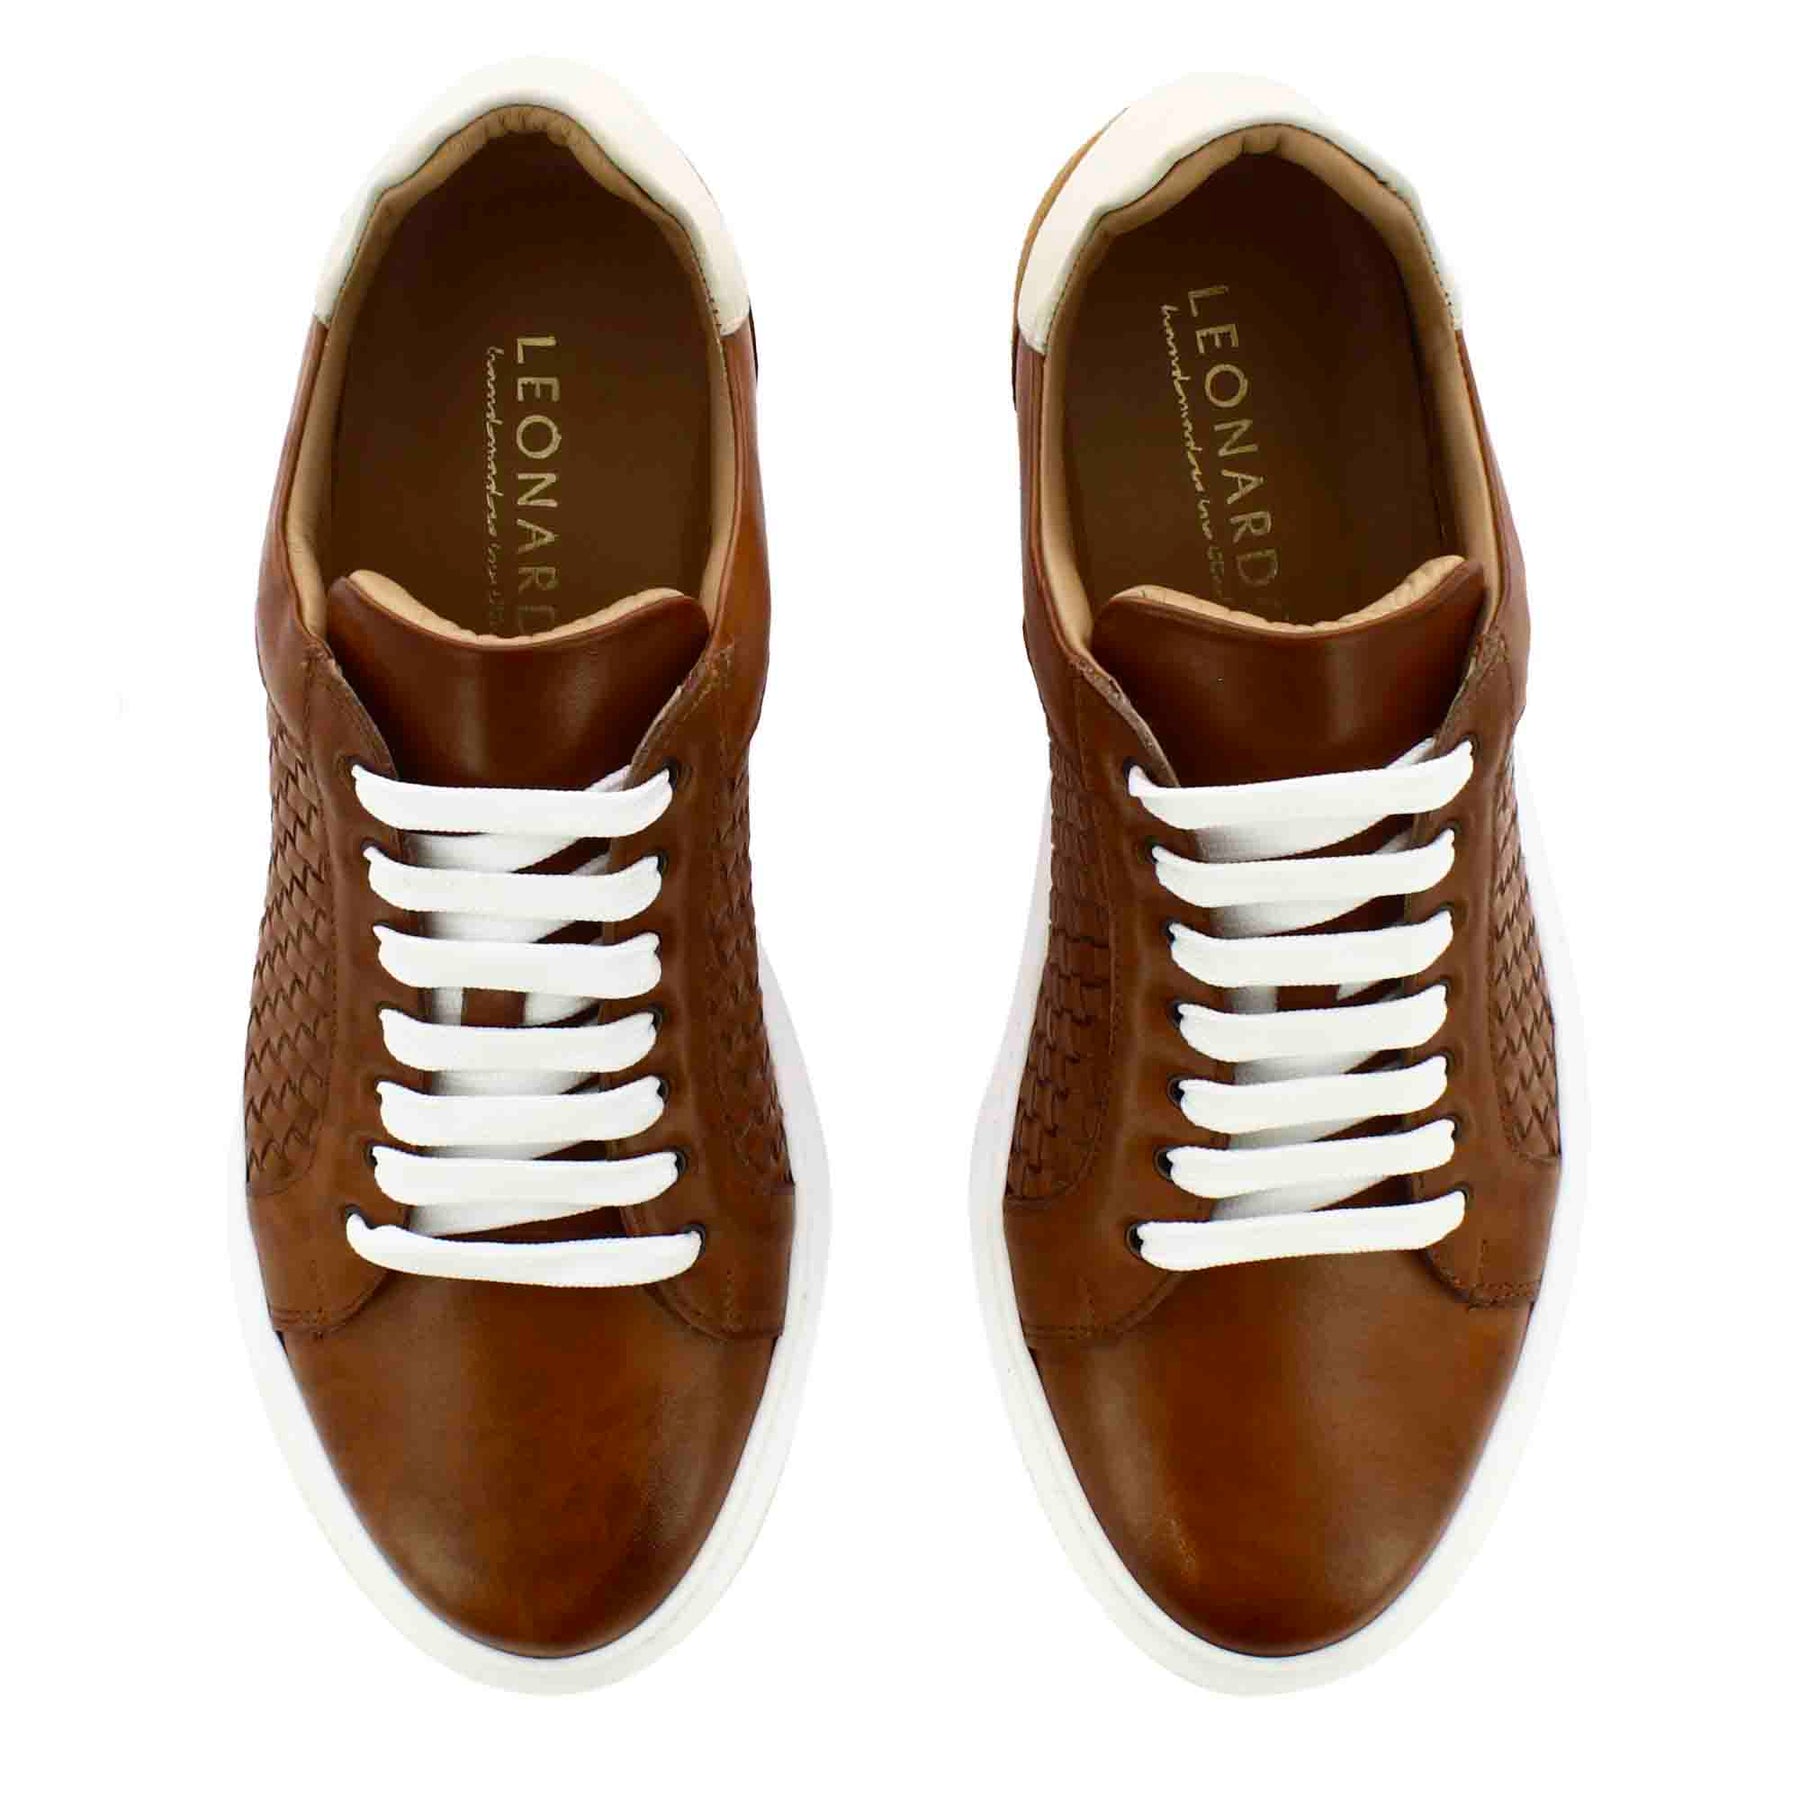 Casual brown woven leather Italian men's trainers